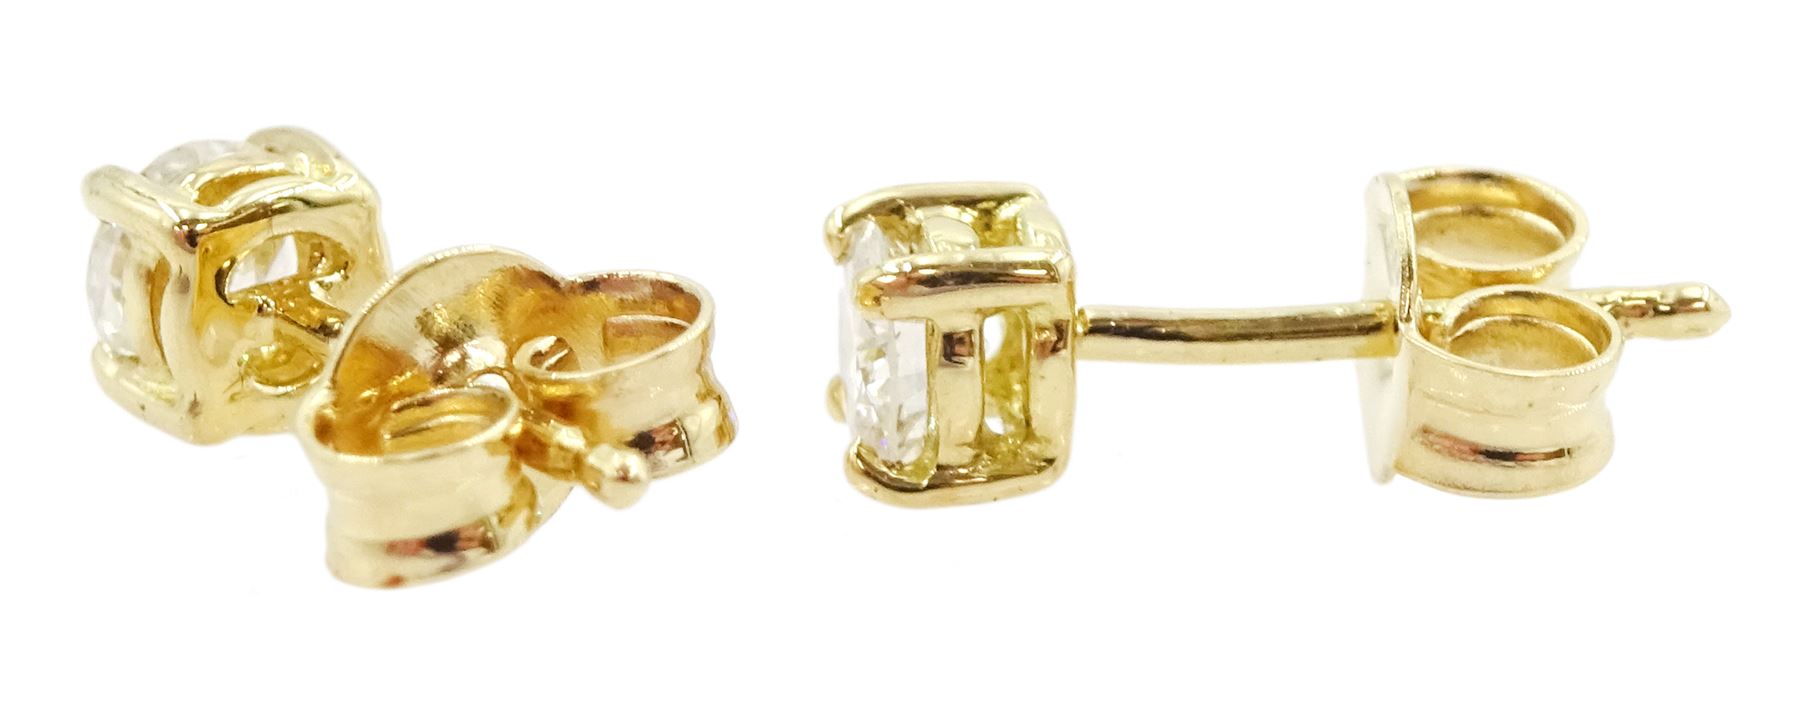 Pair of 18ct gold round brilliant cut diamond stud earrings - Image 2 of 2